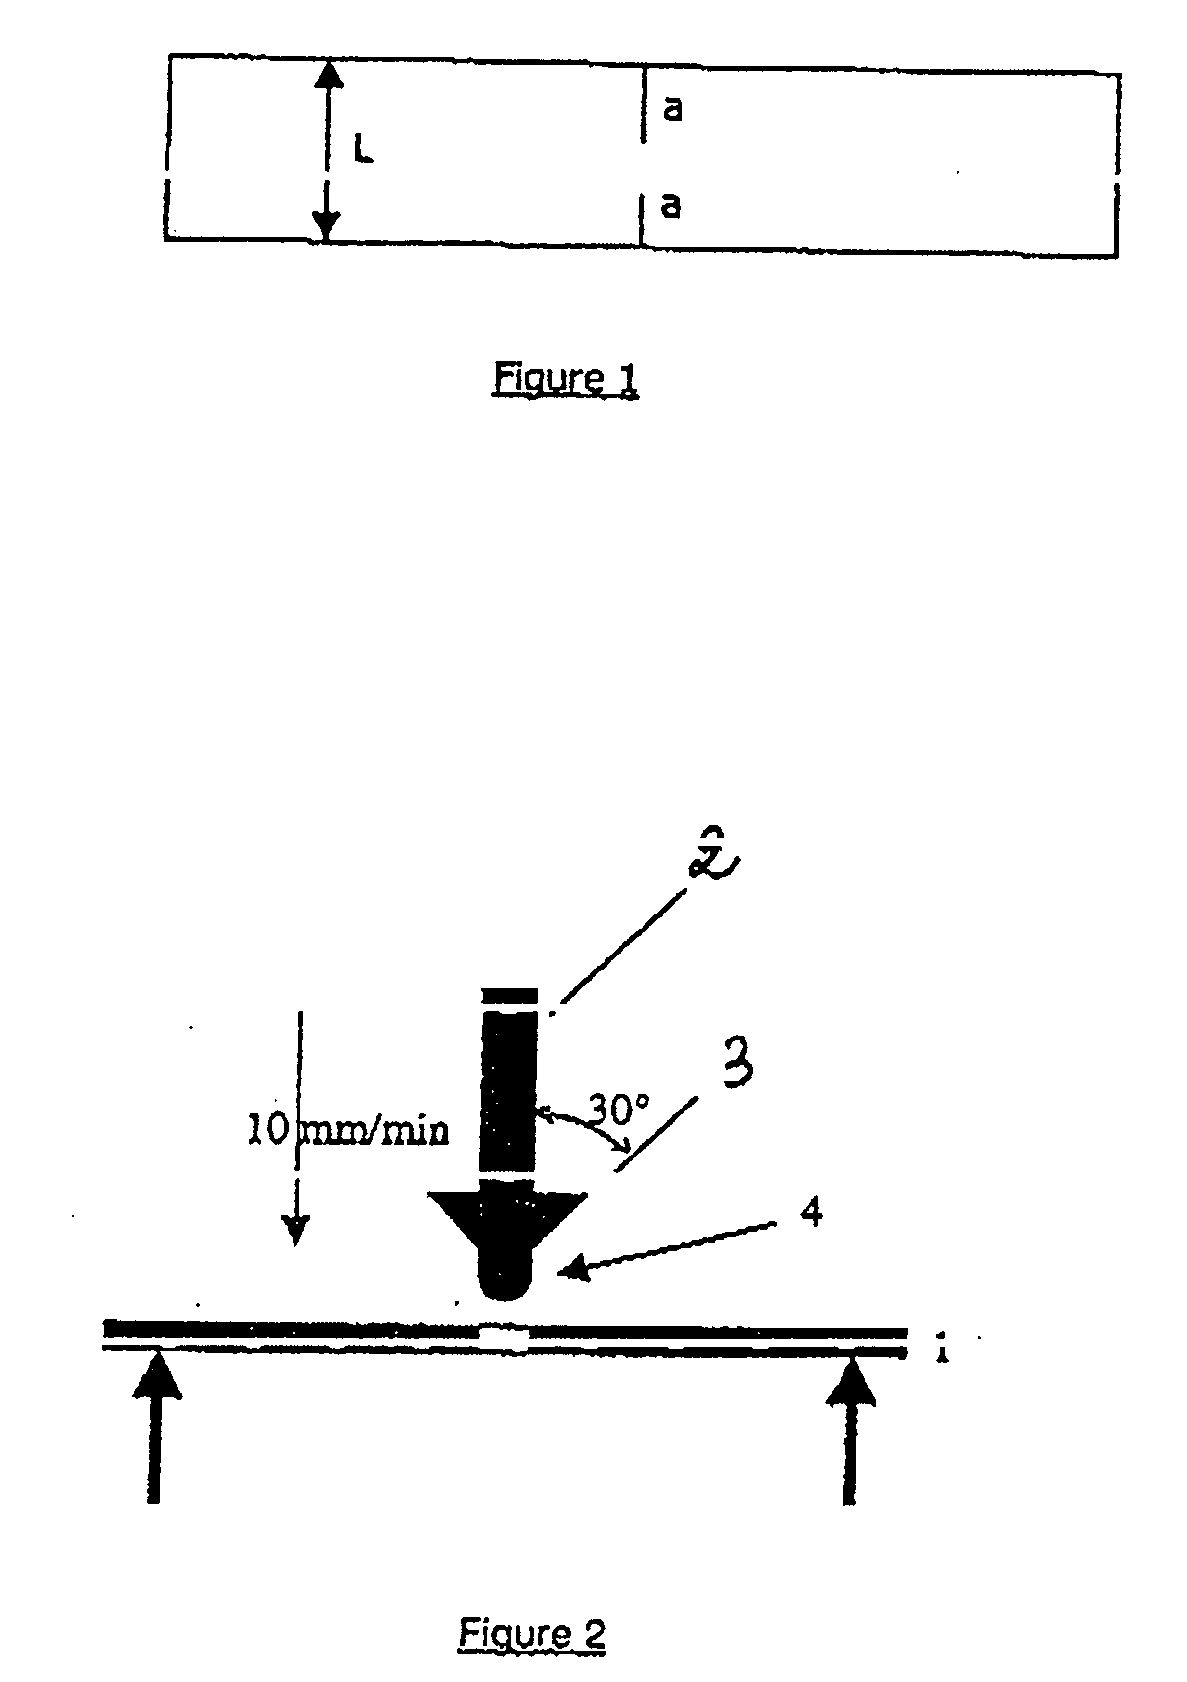 Thermoplastic polymer material for audio and/or optical information recording media